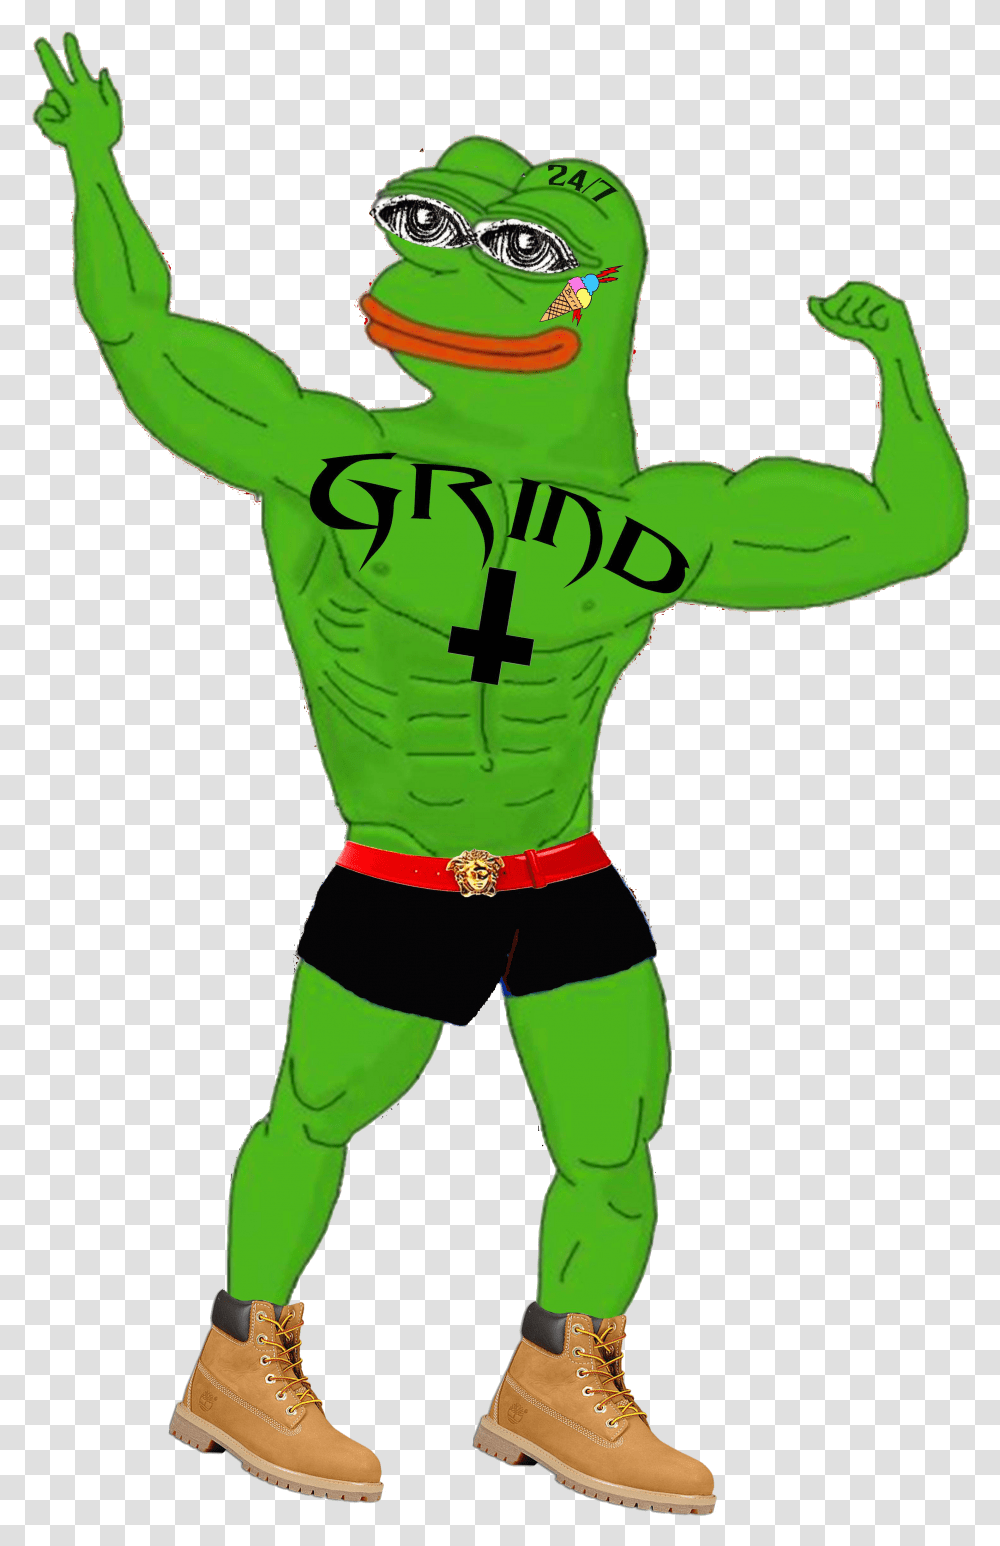 Grind Pepe Pepe The Frog Lifting Full Size Download Pepe The Frog Wearing Crown Transparent Png